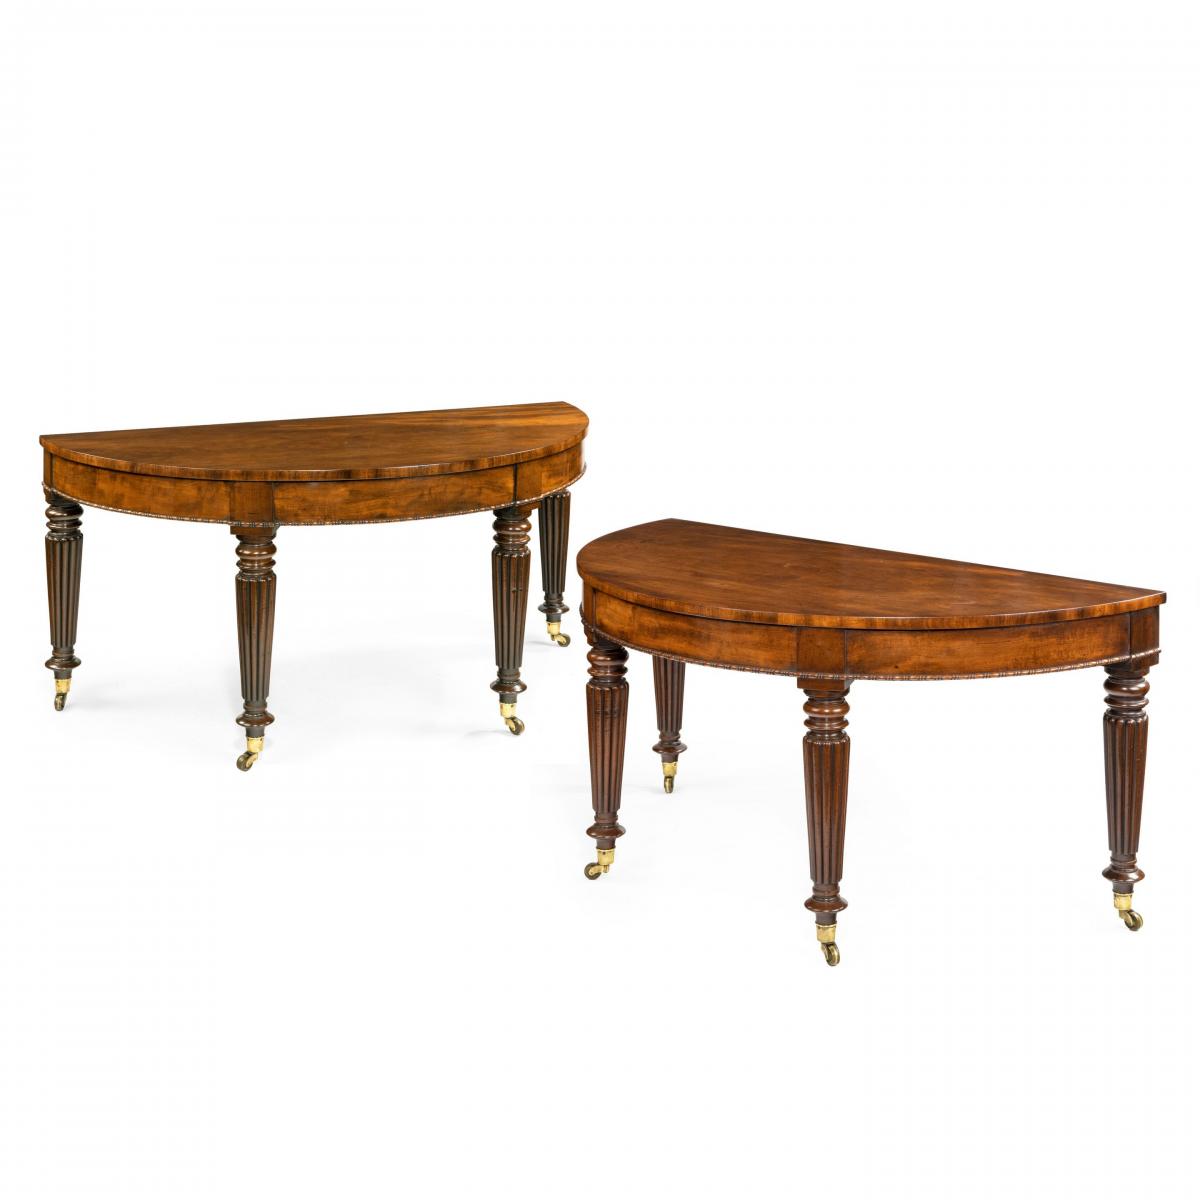 Early Victorian mahogany console tables attributed to Gillows